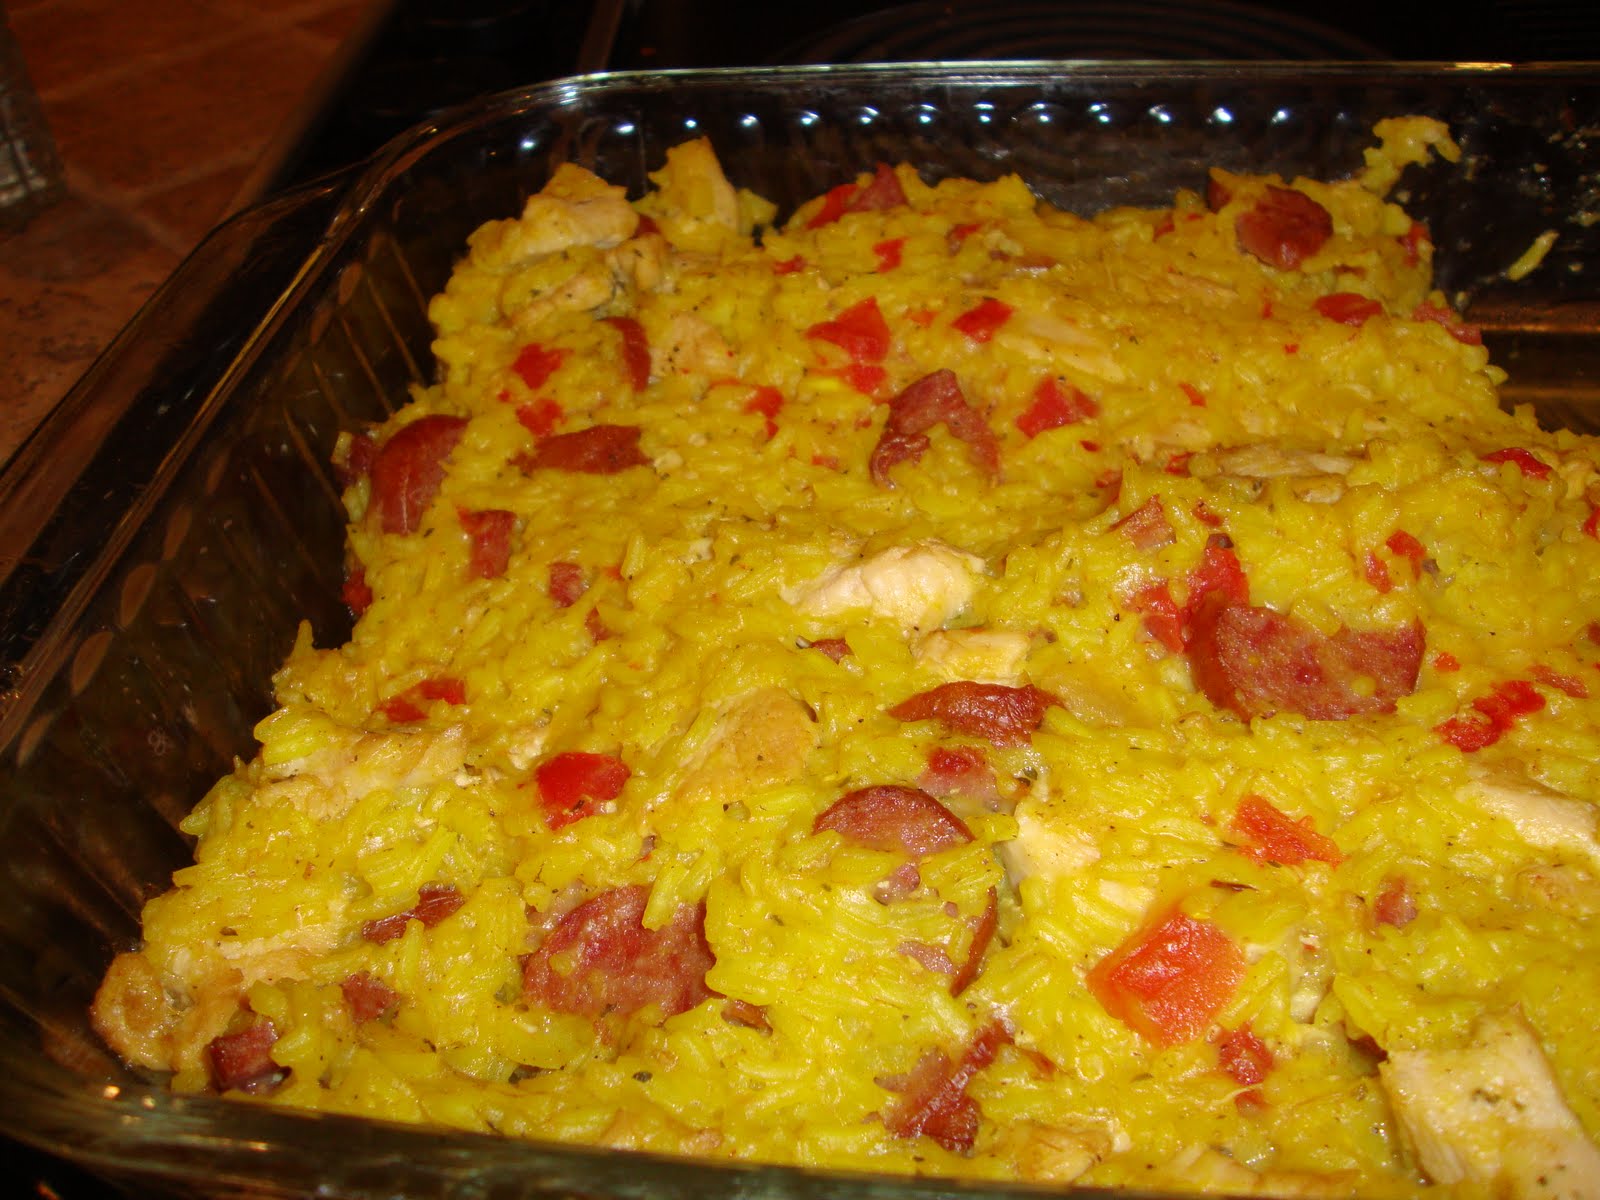 Amazing Grays: Snowed-In with Yellow Rice Casserole